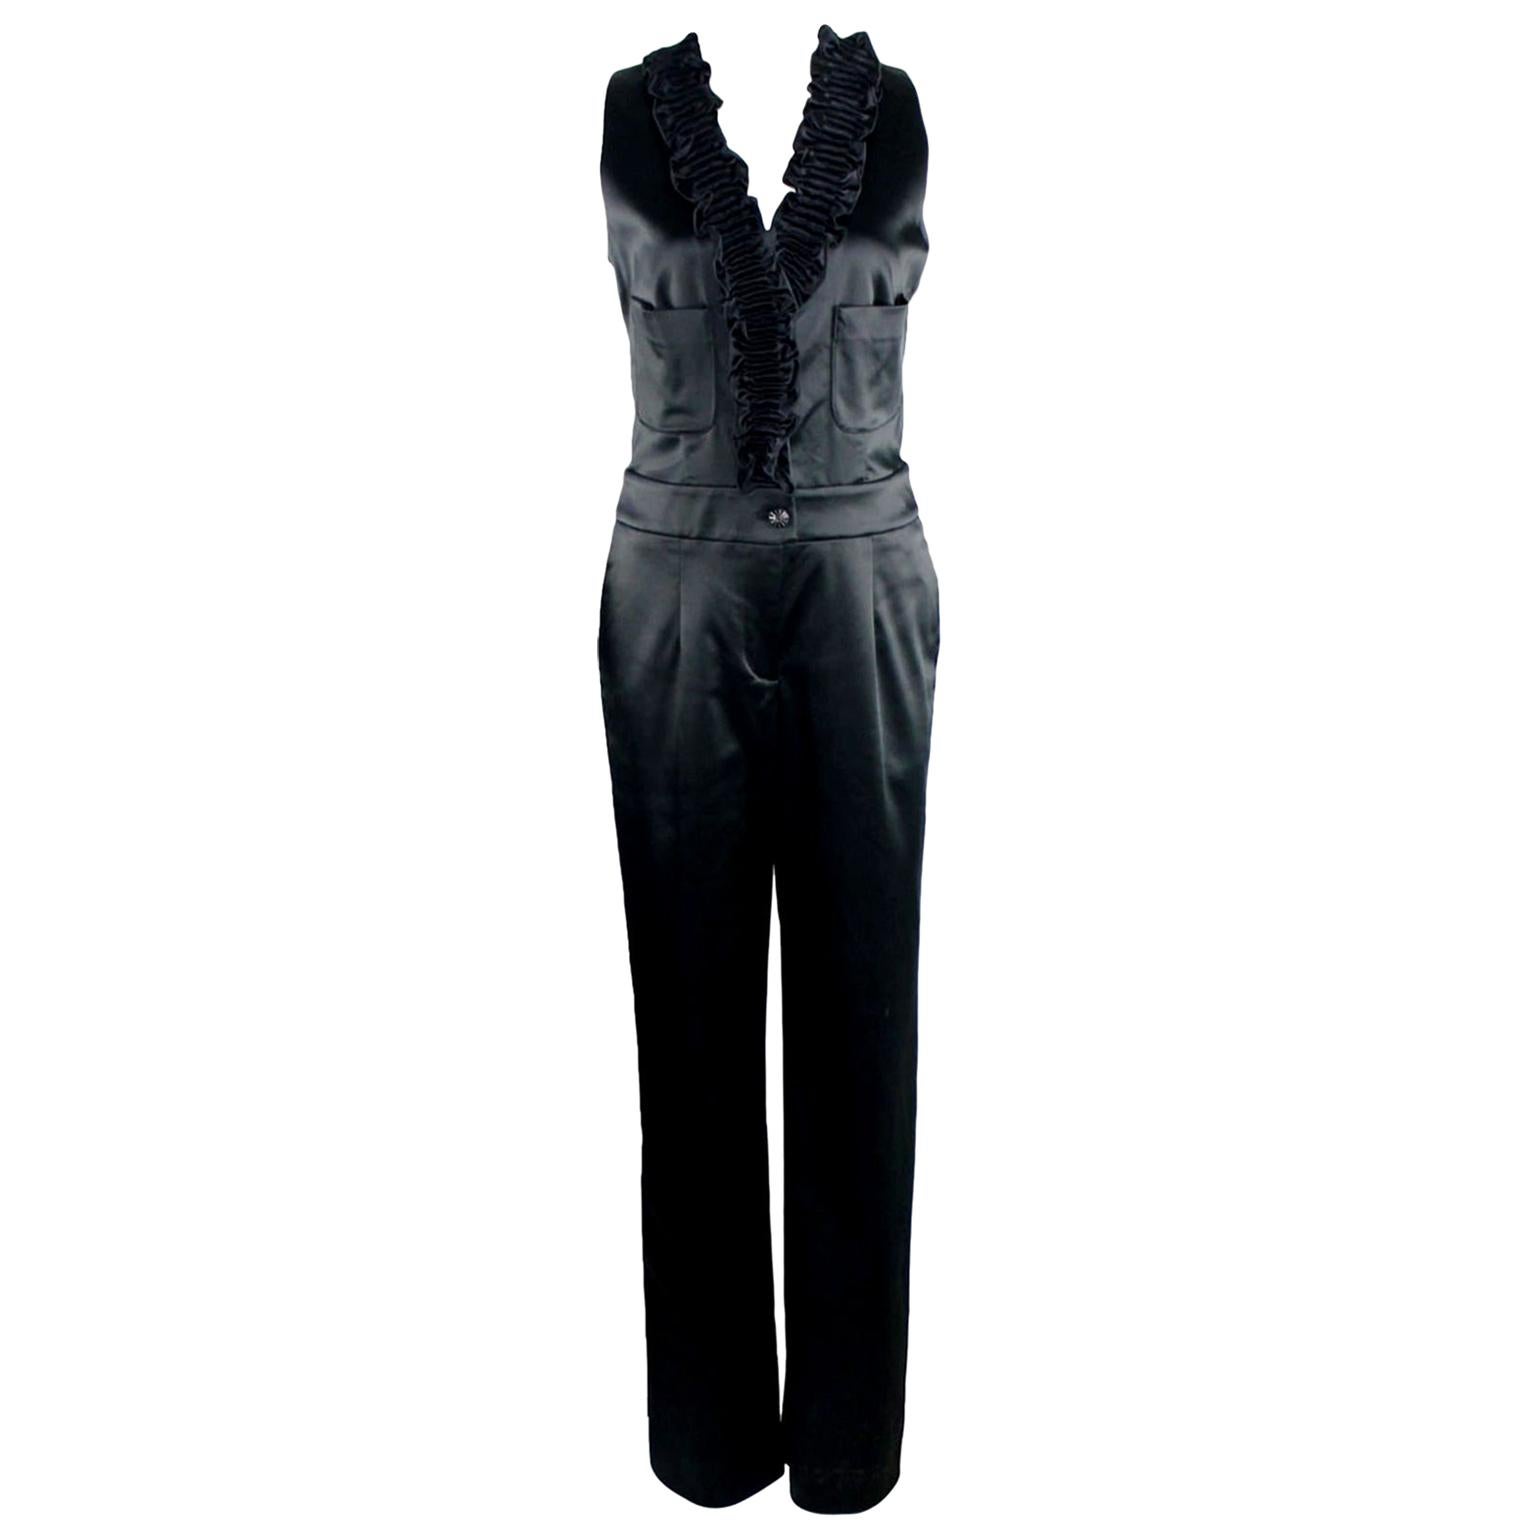 NEW Chanel Black Ruched Evening Tuxedo Smoking Style Jumpsuit Overall